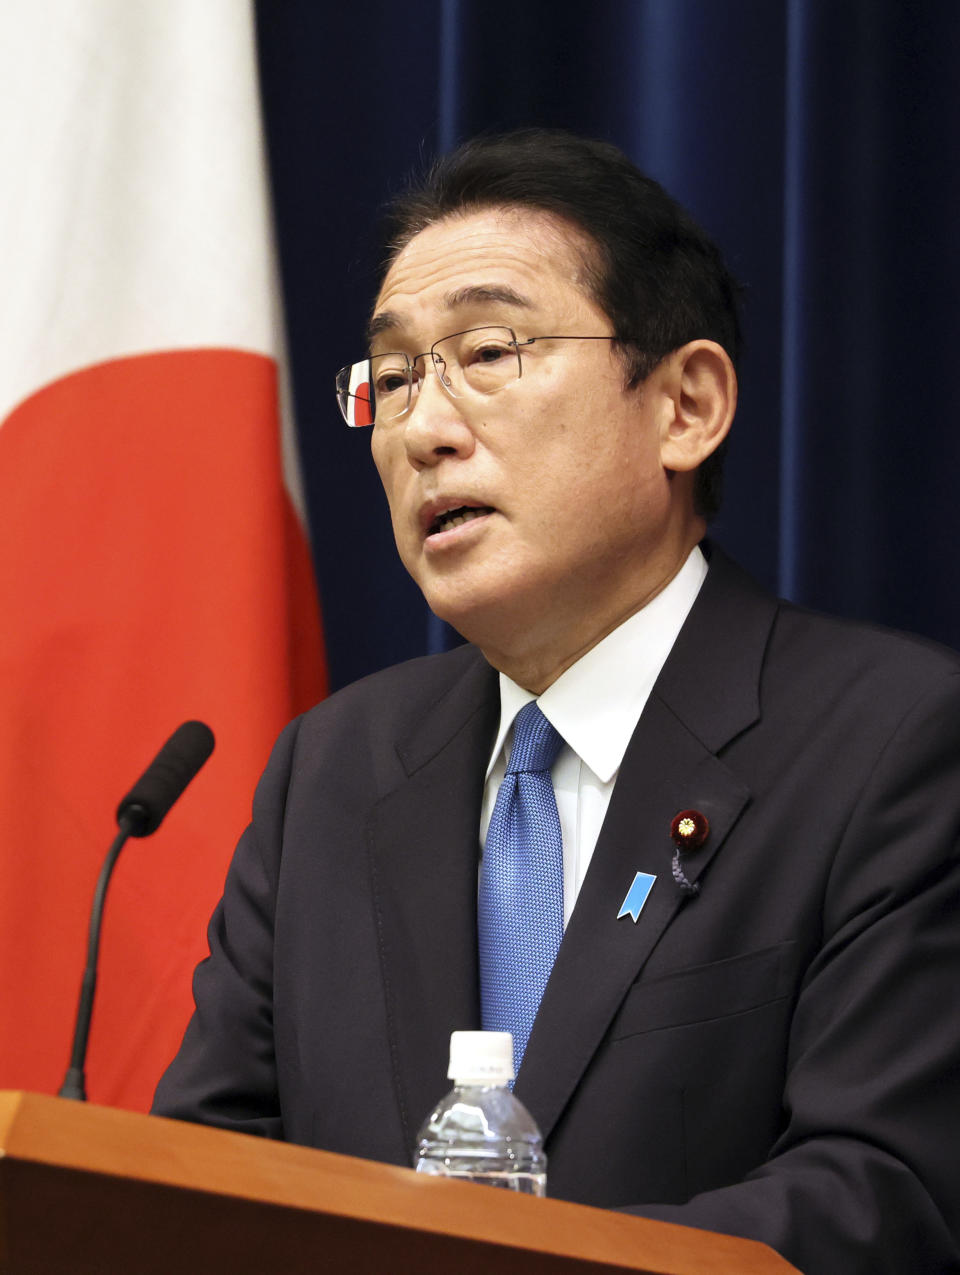 Japanese Prime Minister Fumio Kishida speaks during a news conference at his official residence in Tokyo, Friday Oct. 28, 2022. Kishida’s government approved Friday a hefty economic package that will include government funding of about 29 trillion yen ($200 billion) to soften the burden of costs from rising utility rates and food prices. (Yoshikazu Tsuno/Pool Photo via AP)